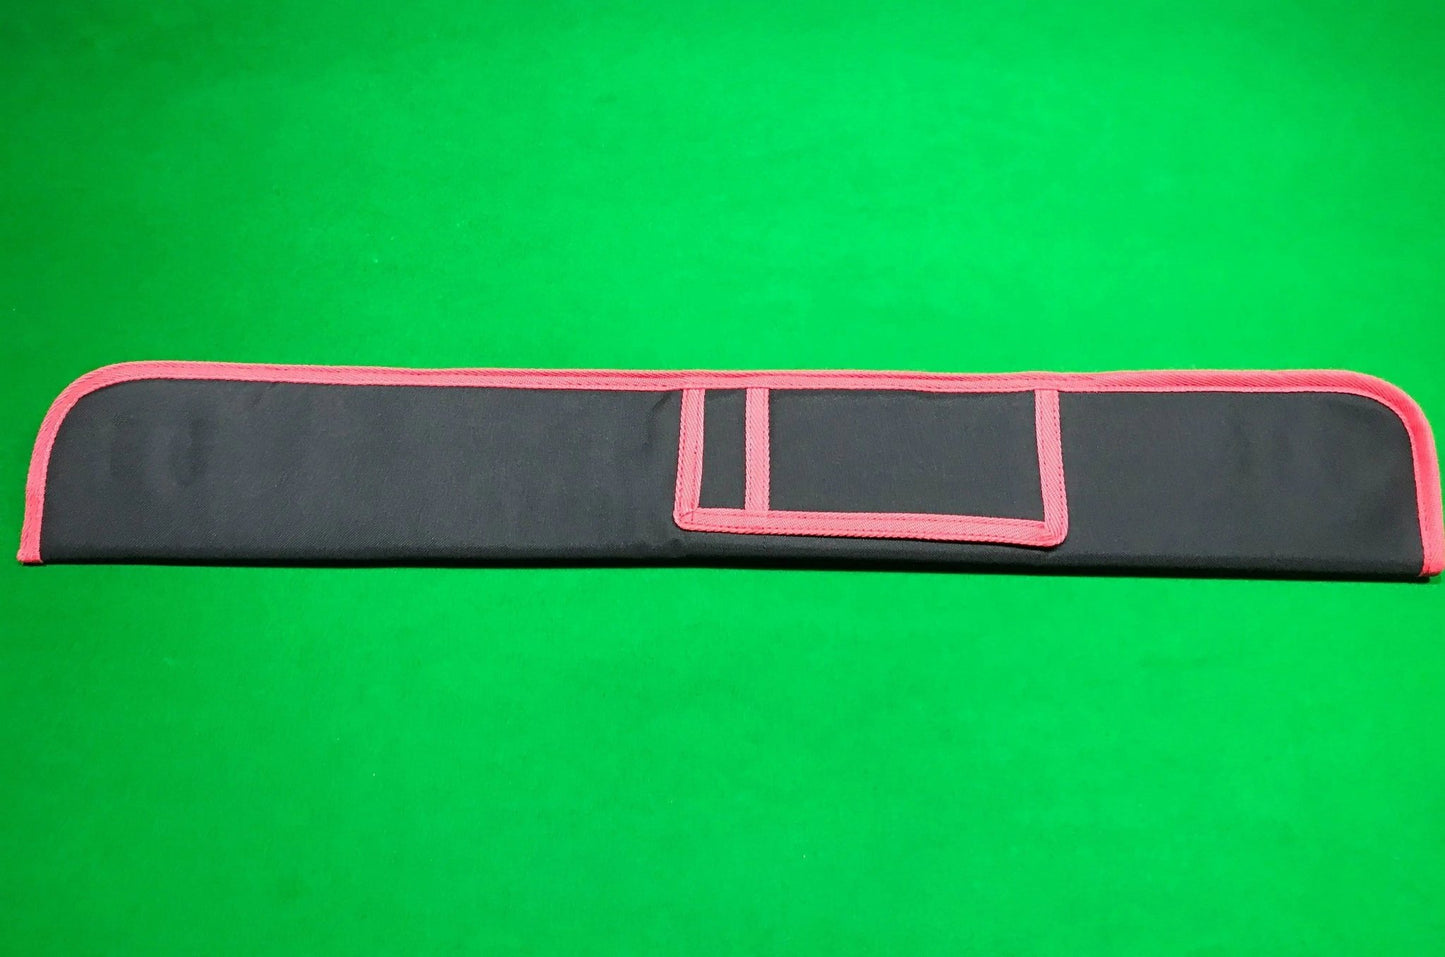 2 Piece Pool, Snooker & Billiard Cue Case (Black with Red Trim) - Q-Masters